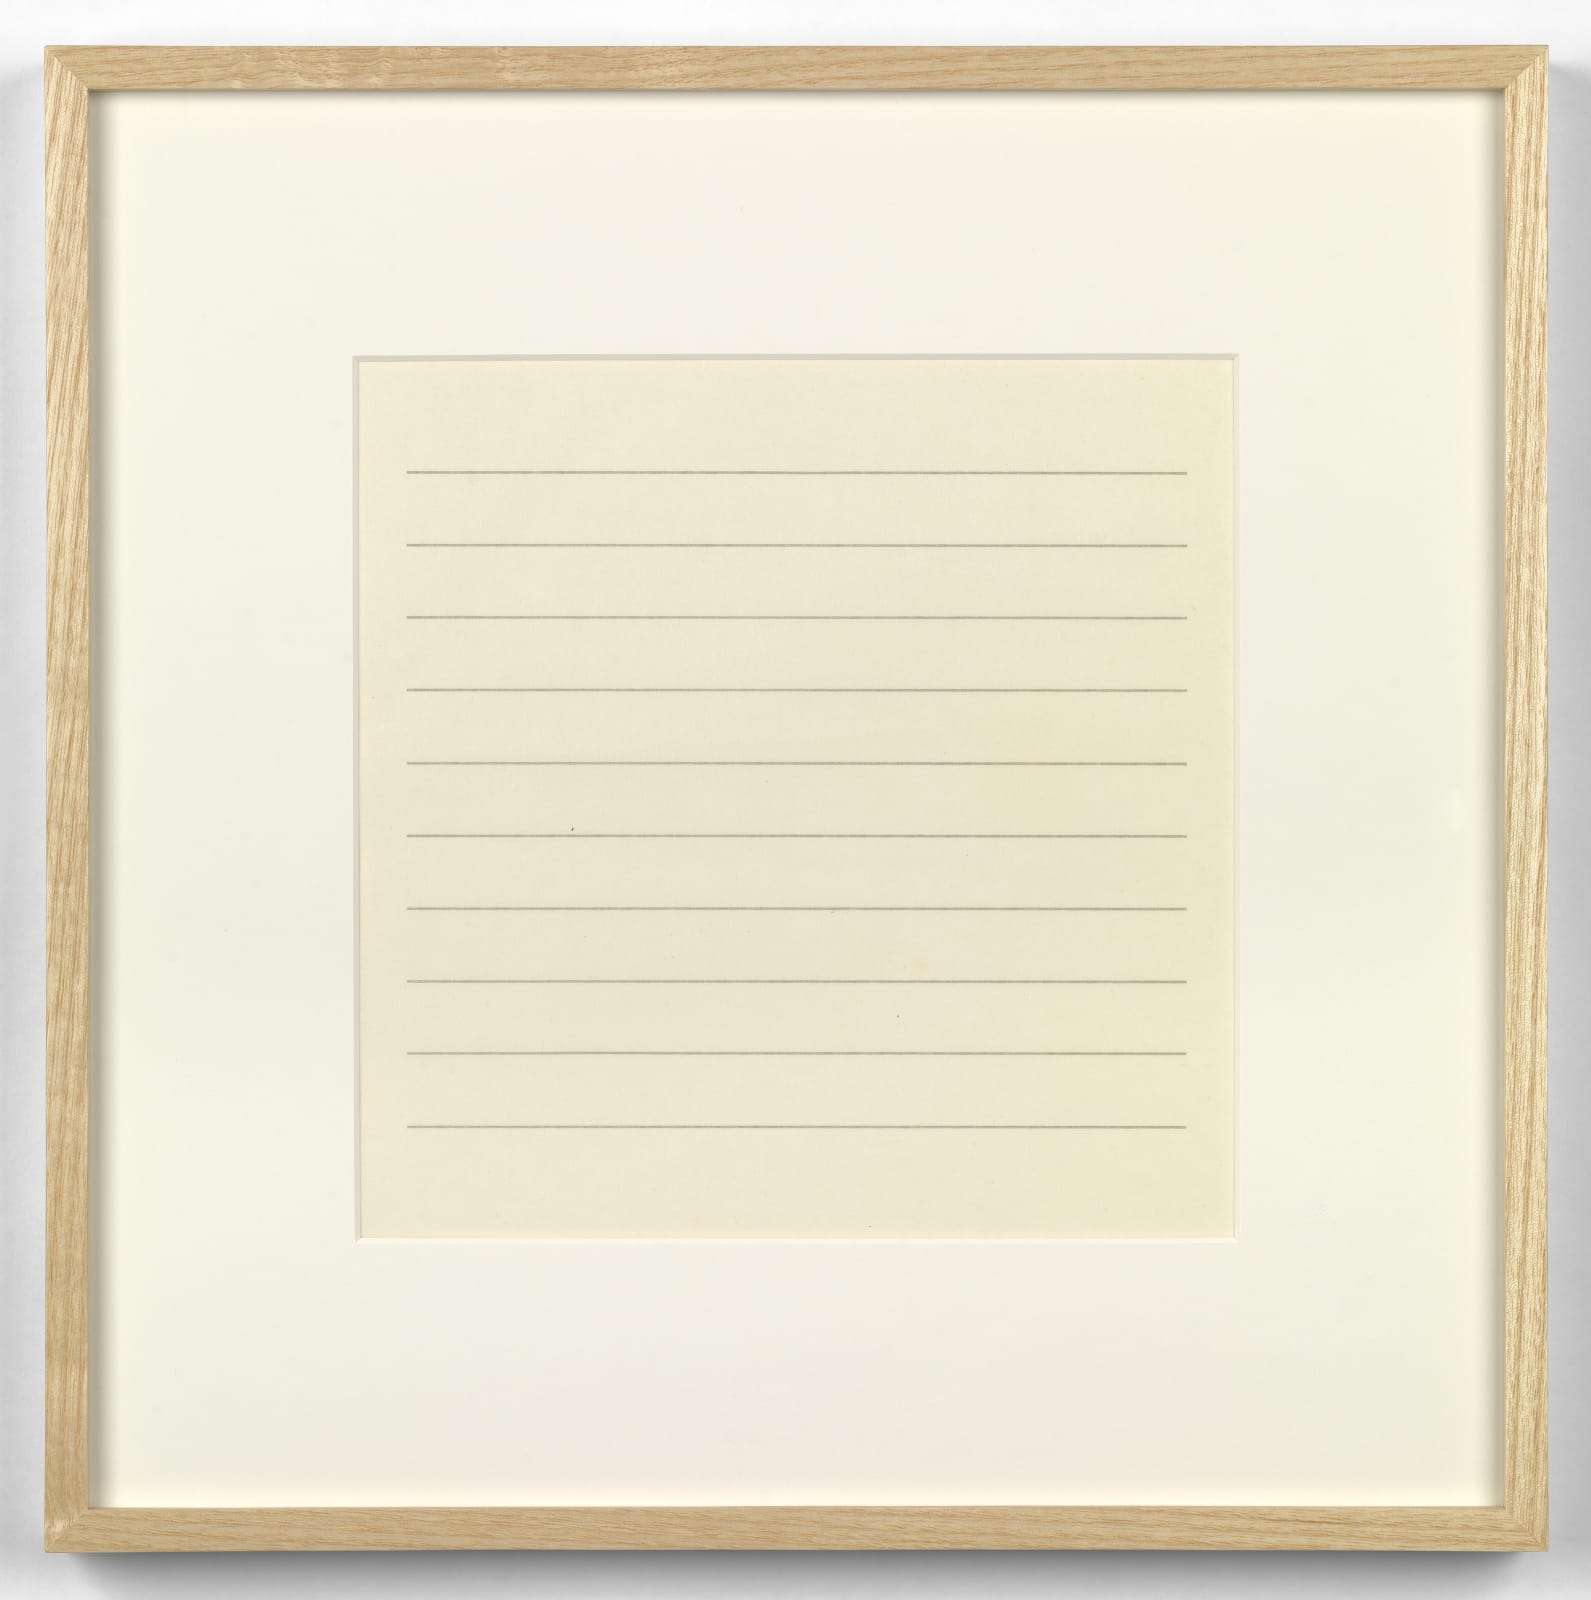 Agnes Martin, Untitled (On a Clear Day) #16, 1973